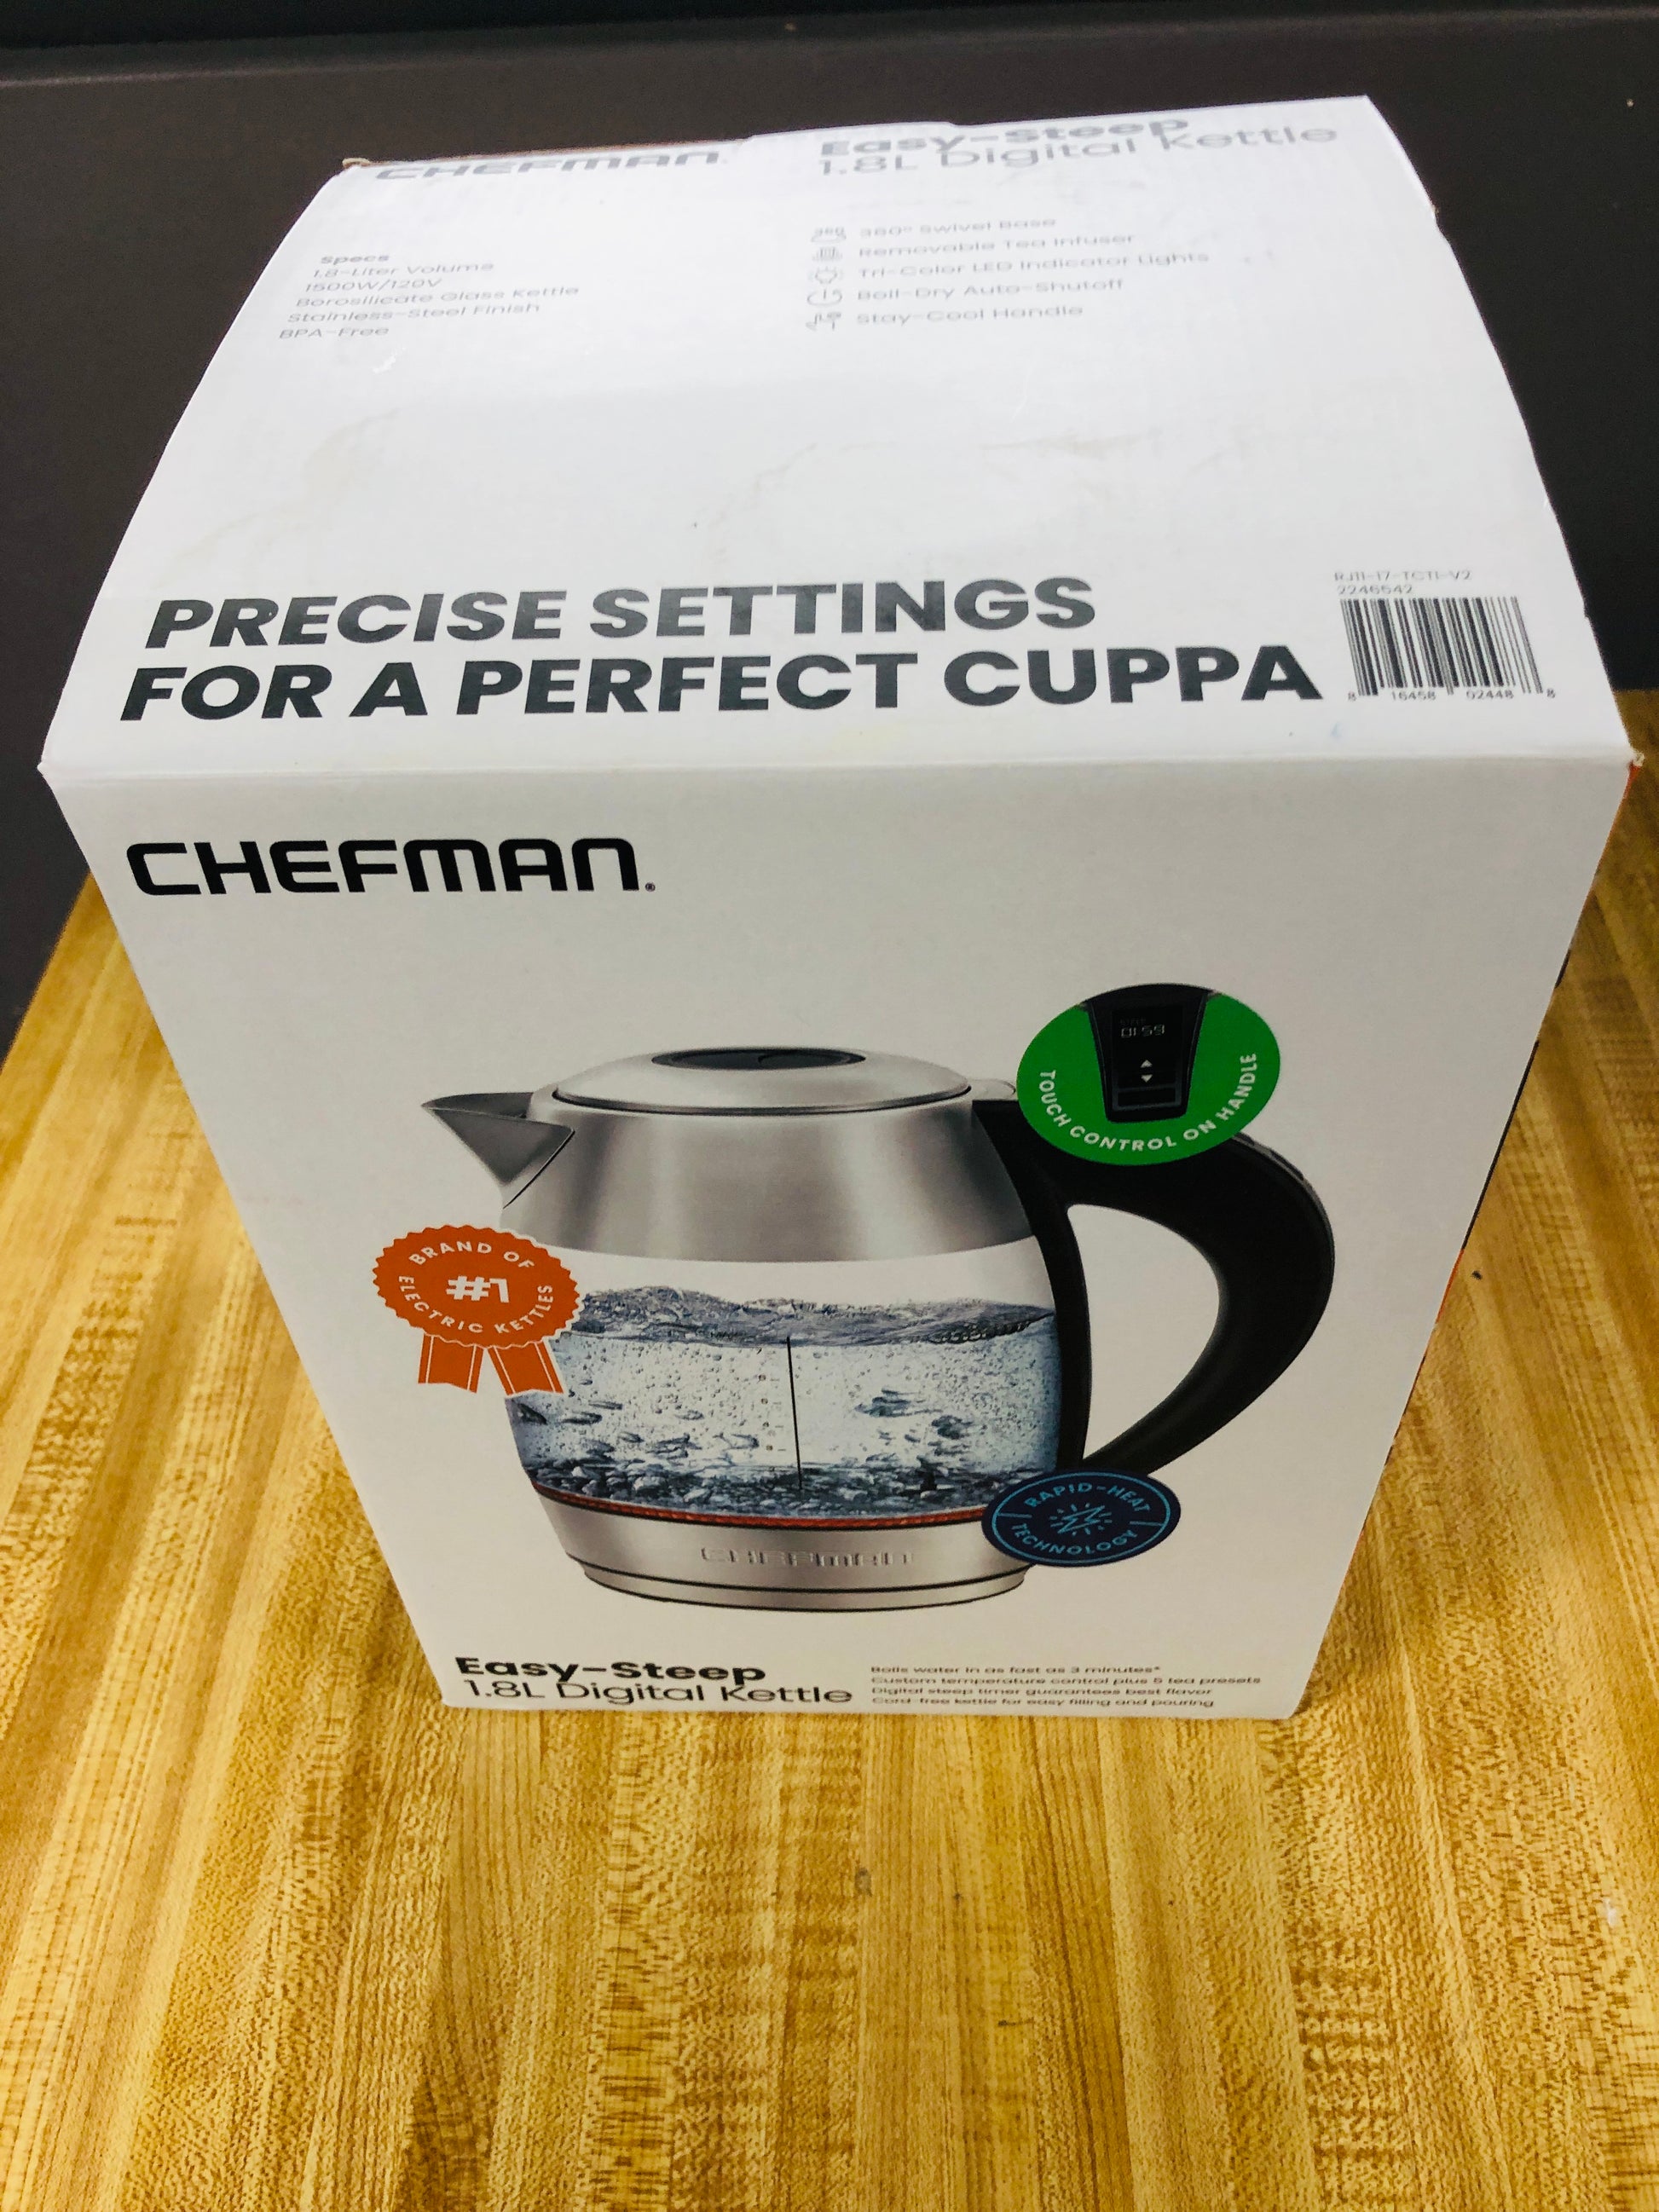 Chefman Electric Glass Kettle W/ Tea Infuser, Stainless Steel, 1.8